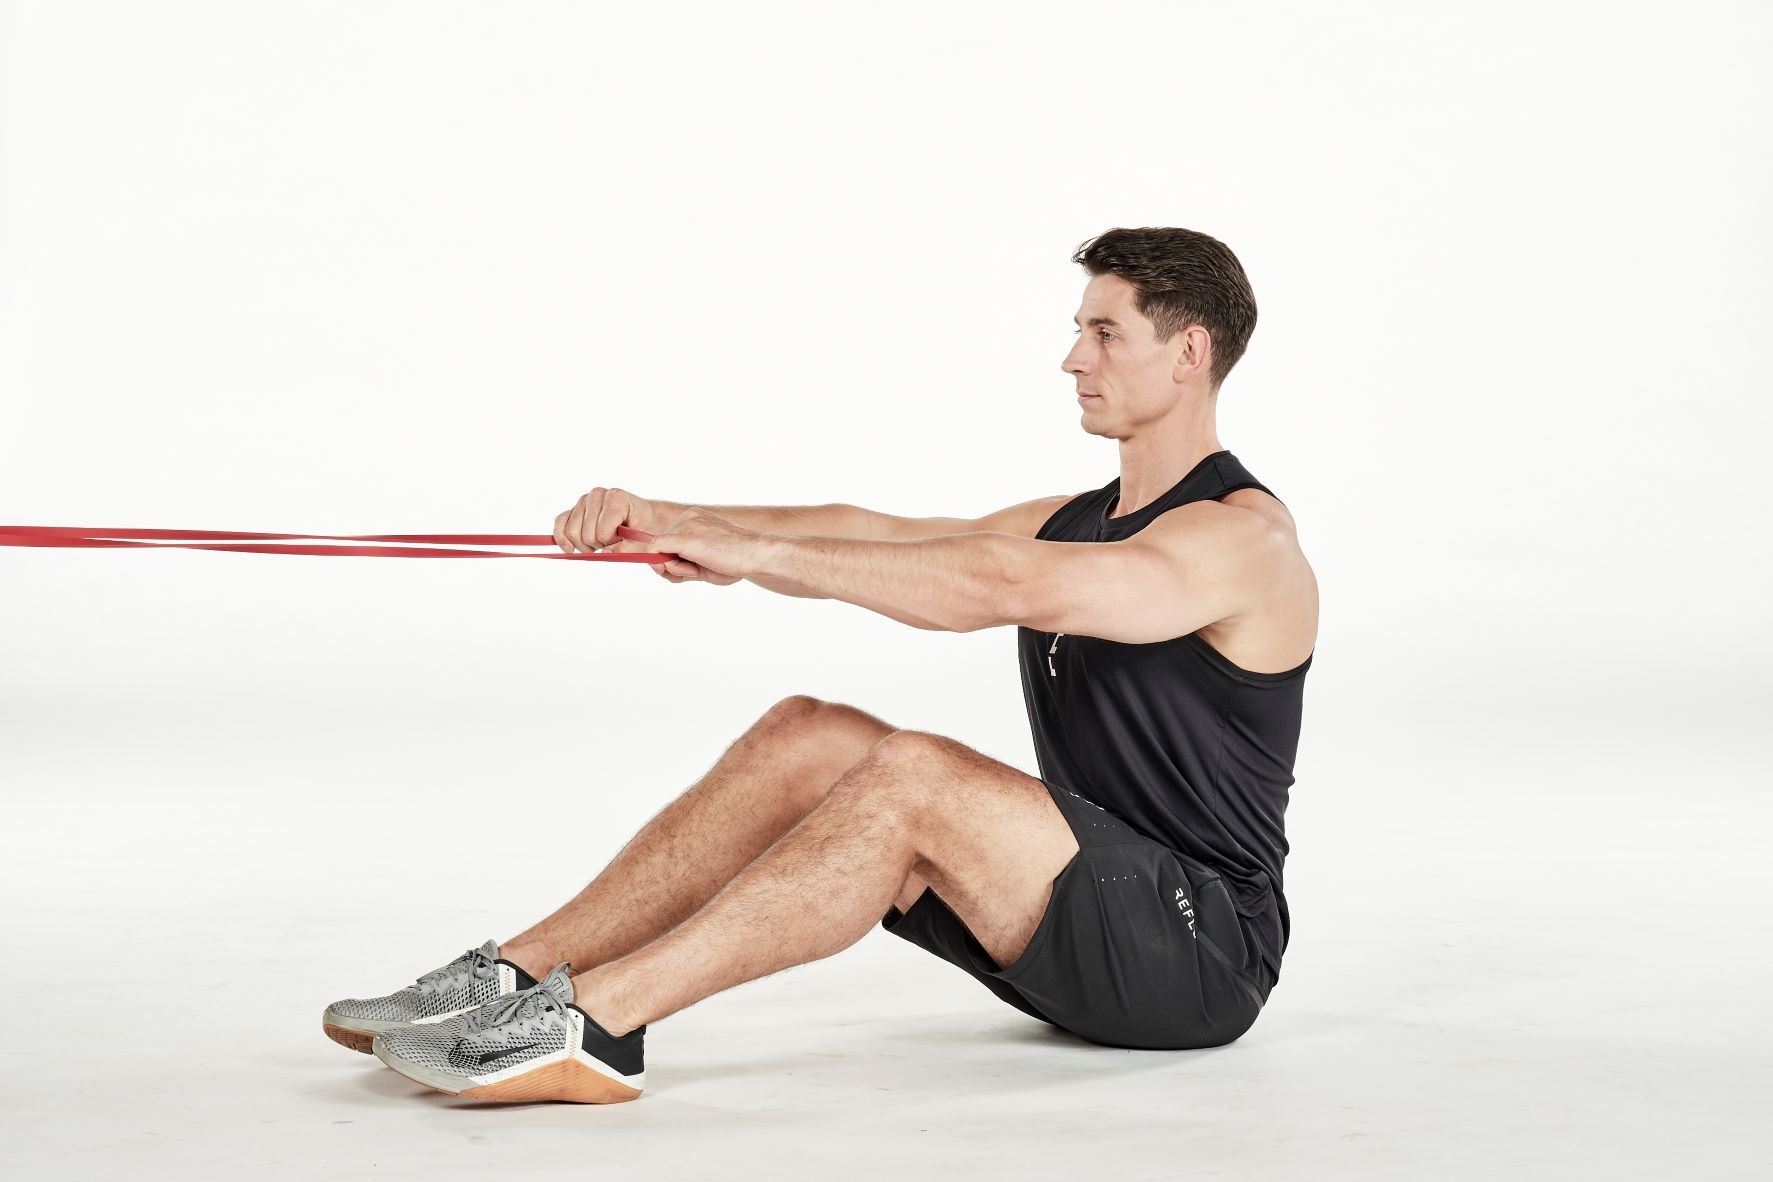 man demonstrating step one of seated face pull; seated with knees bent, he holds a secured resistance band; his arms are straight, outstretched in front of him; he wears a black fitness vest, black shorts and trainers